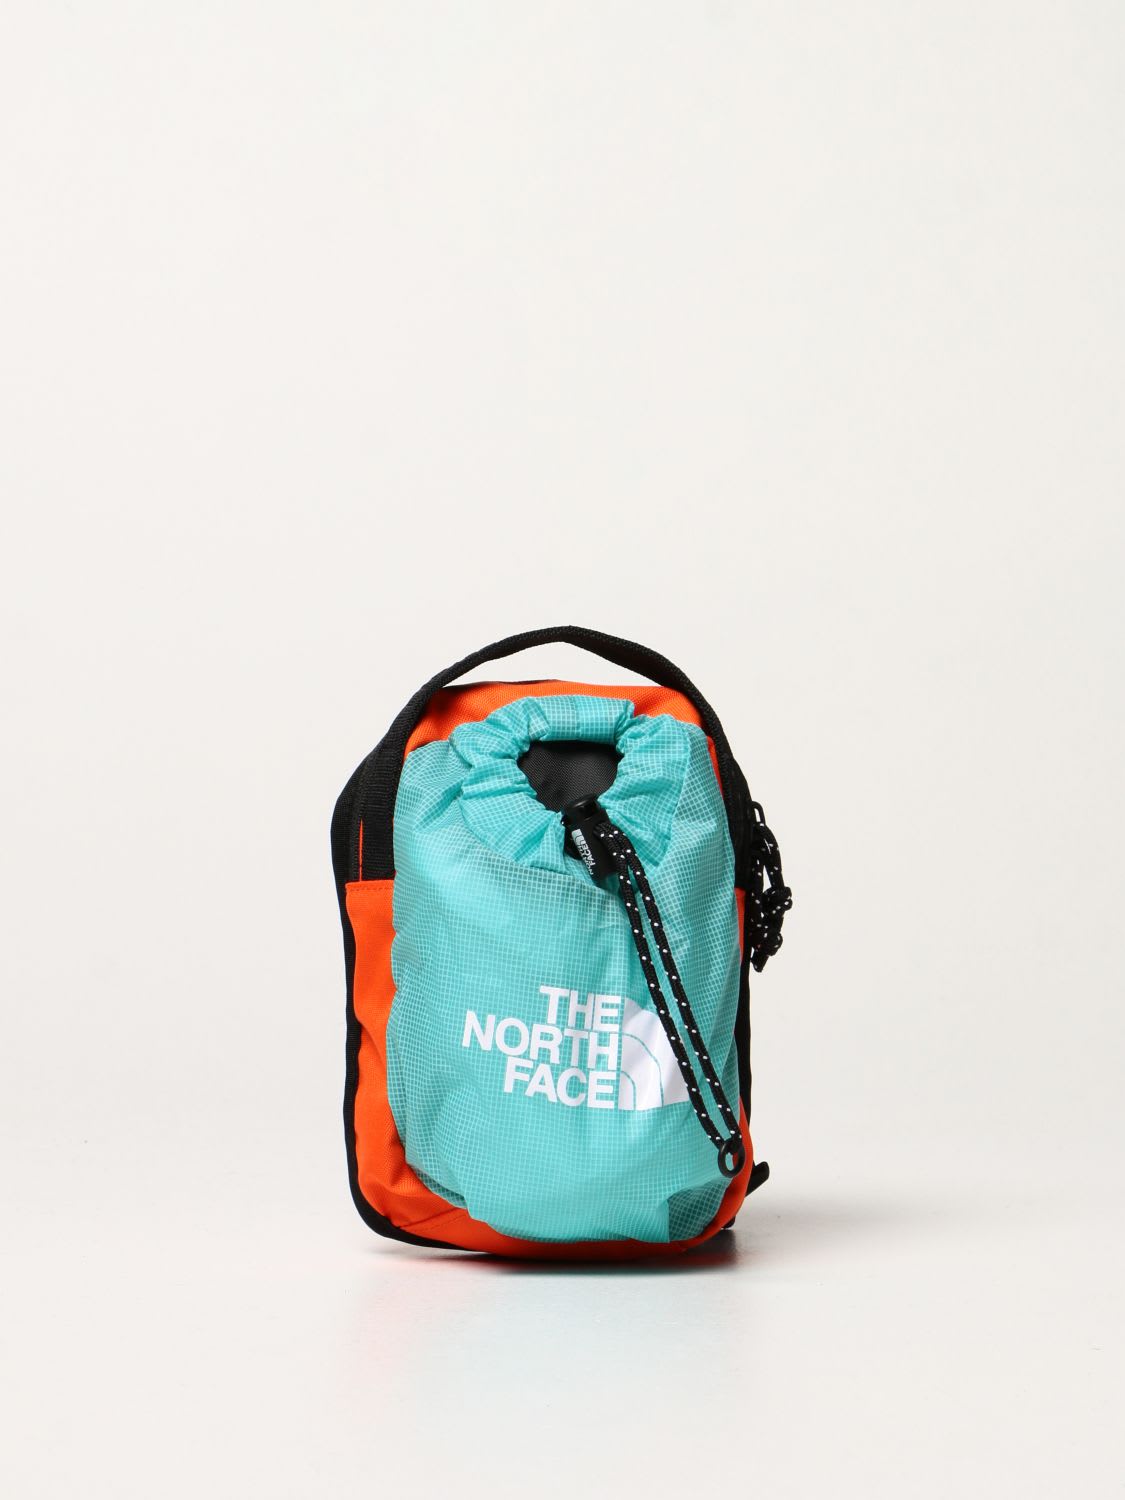 The North Face Shoulder Bag Bags Men The North Face